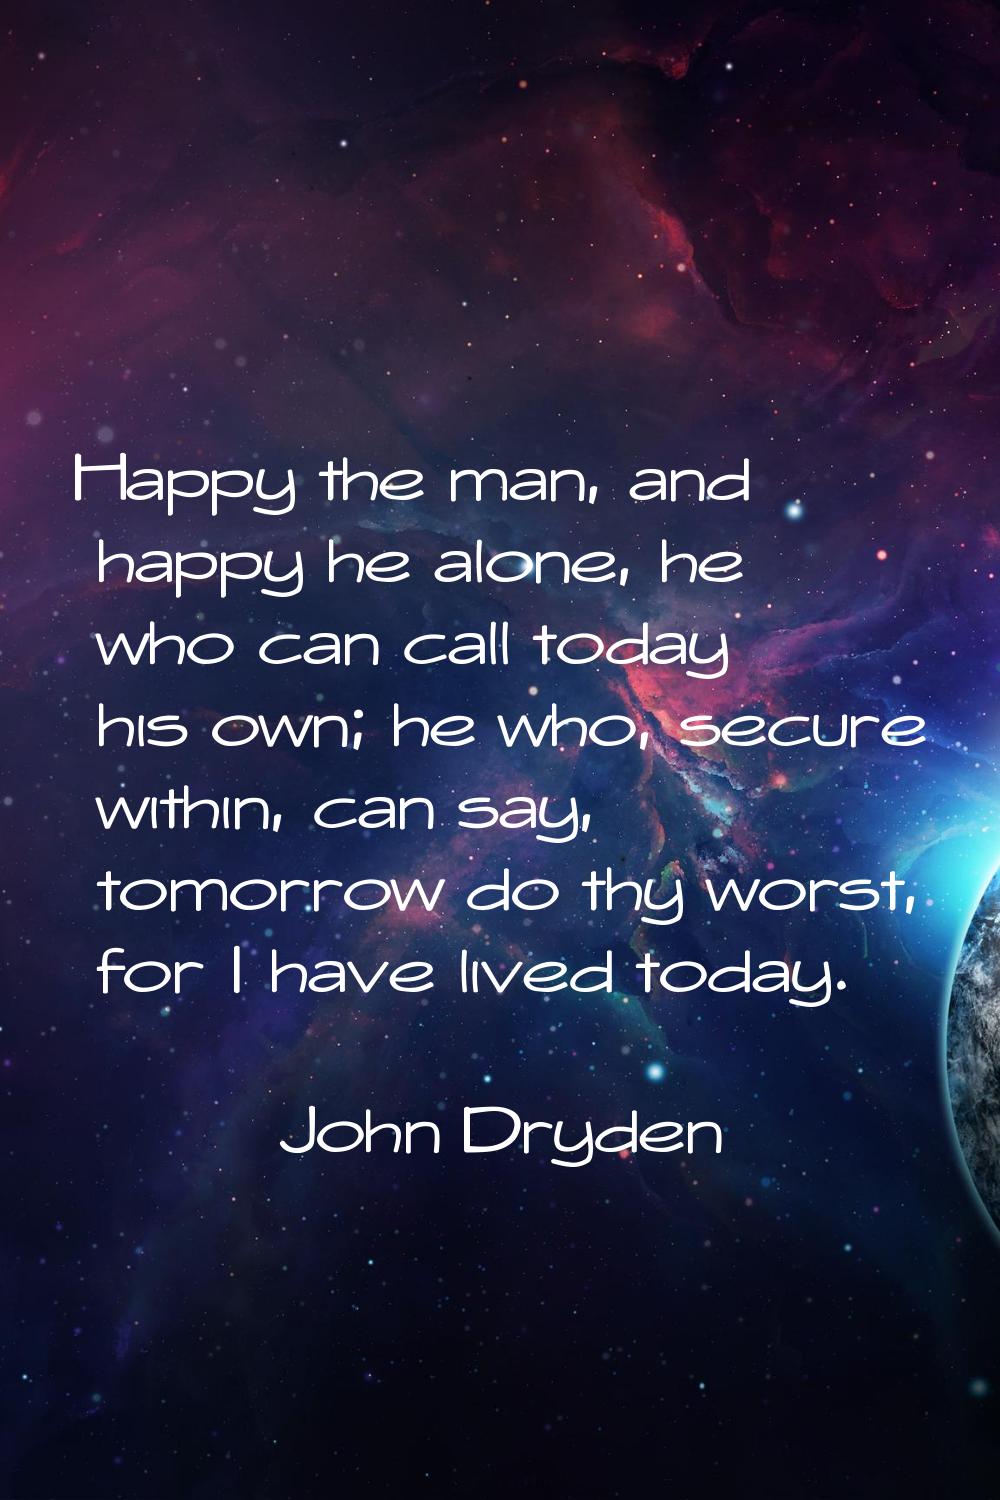 Happy the man, and happy he alone, he who can call today his own; he who, secure within, can say, t